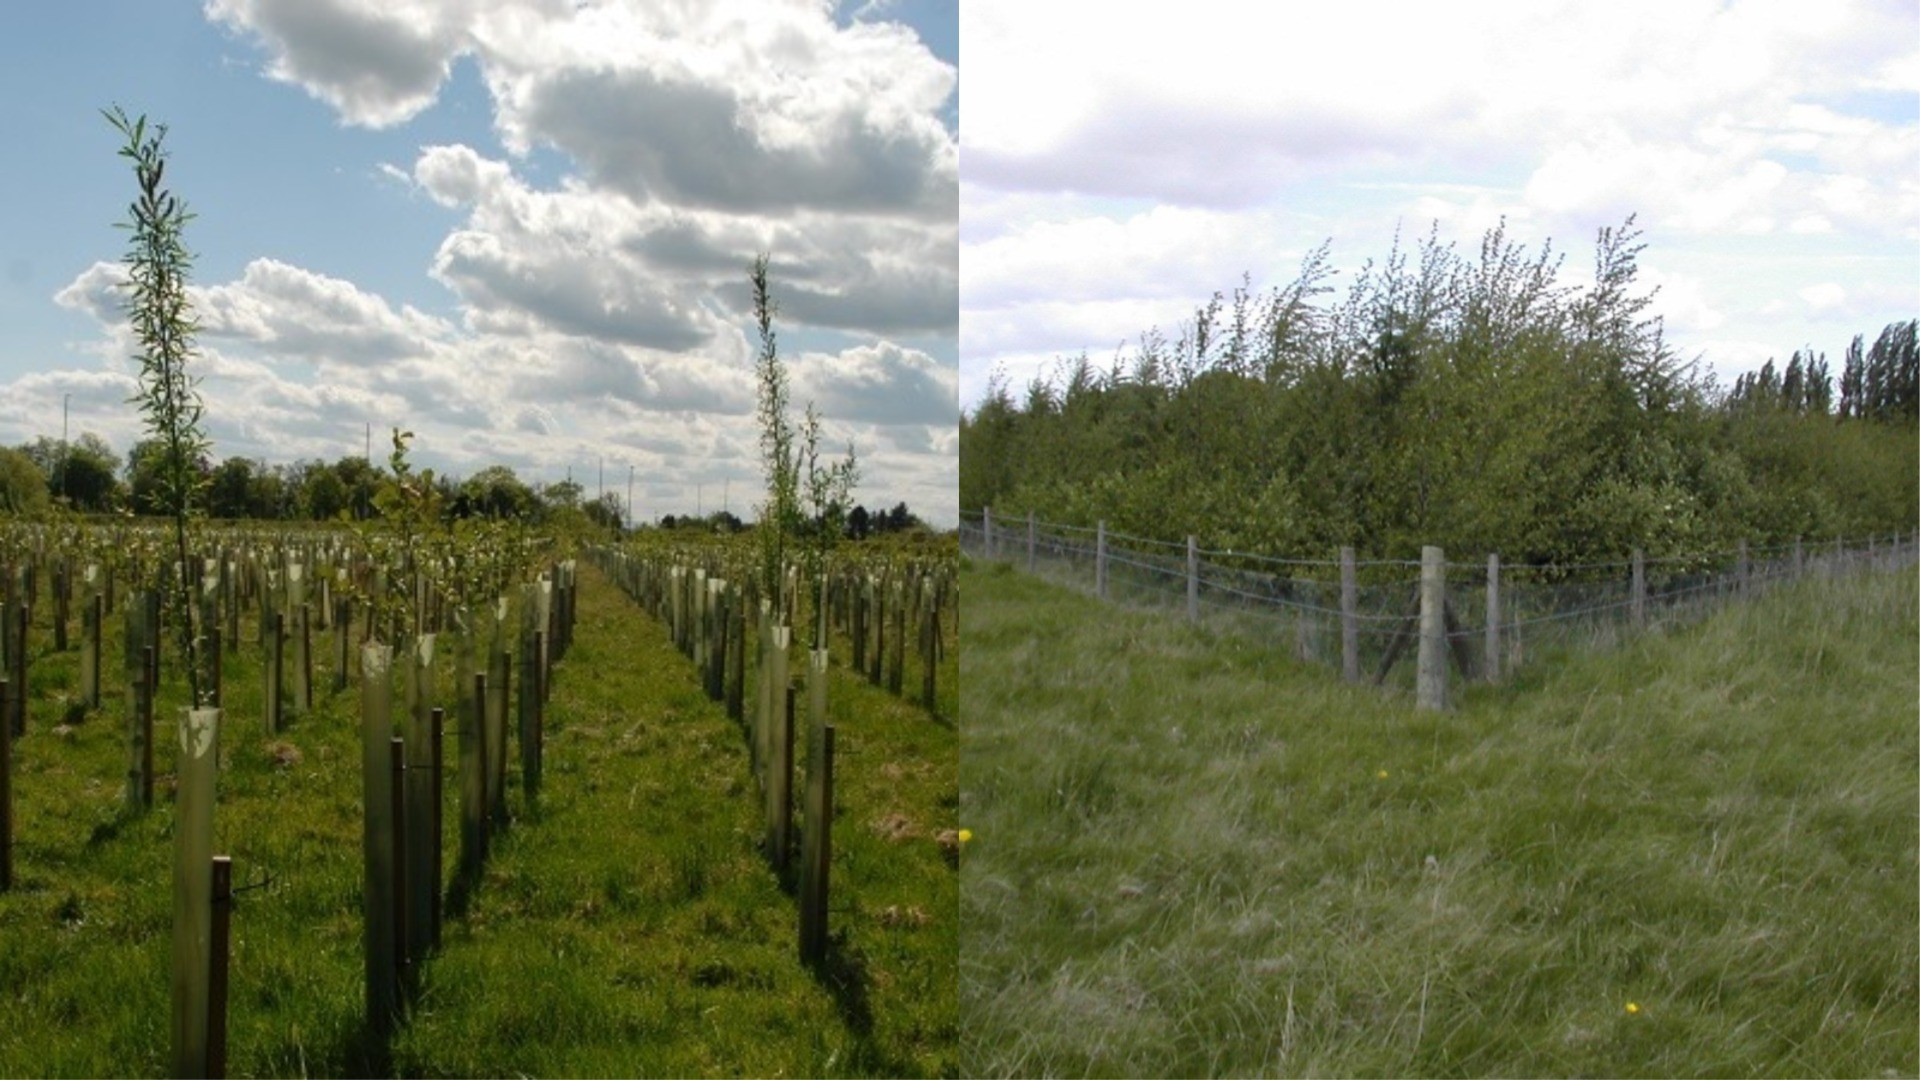 saplings at one and five years from planting